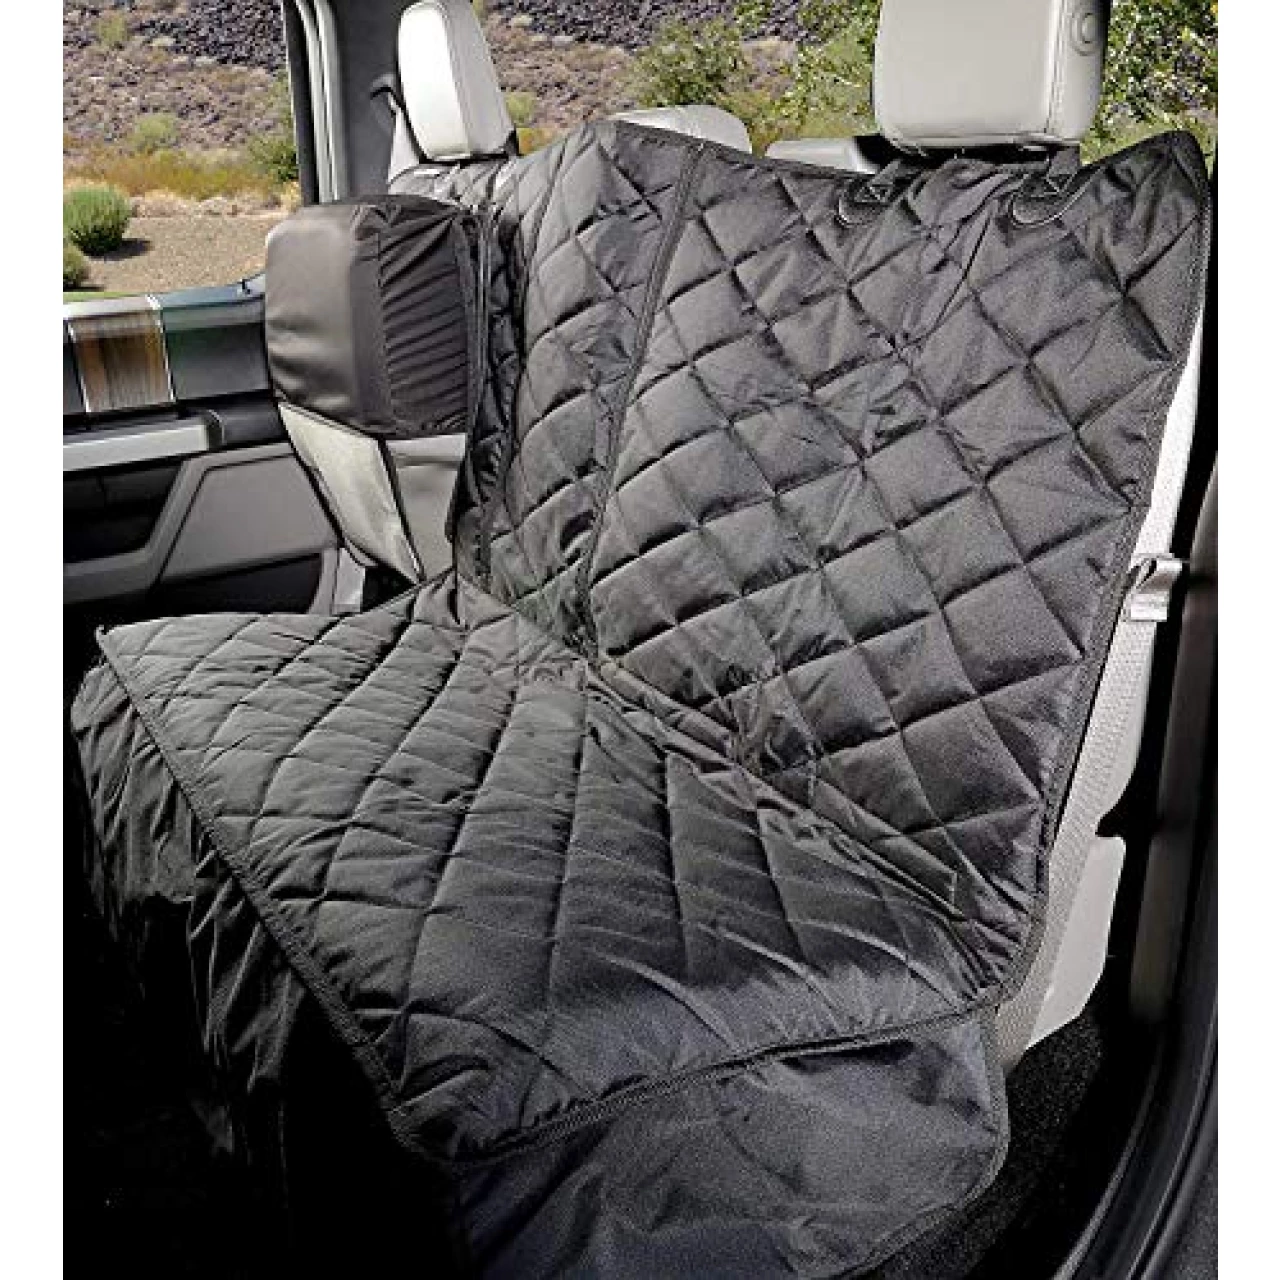 4Knines Crew Cab Truck Rear Bench Seat Cover with Hammock - Heavy Duty - Waterproof (Black, Passenger Side)